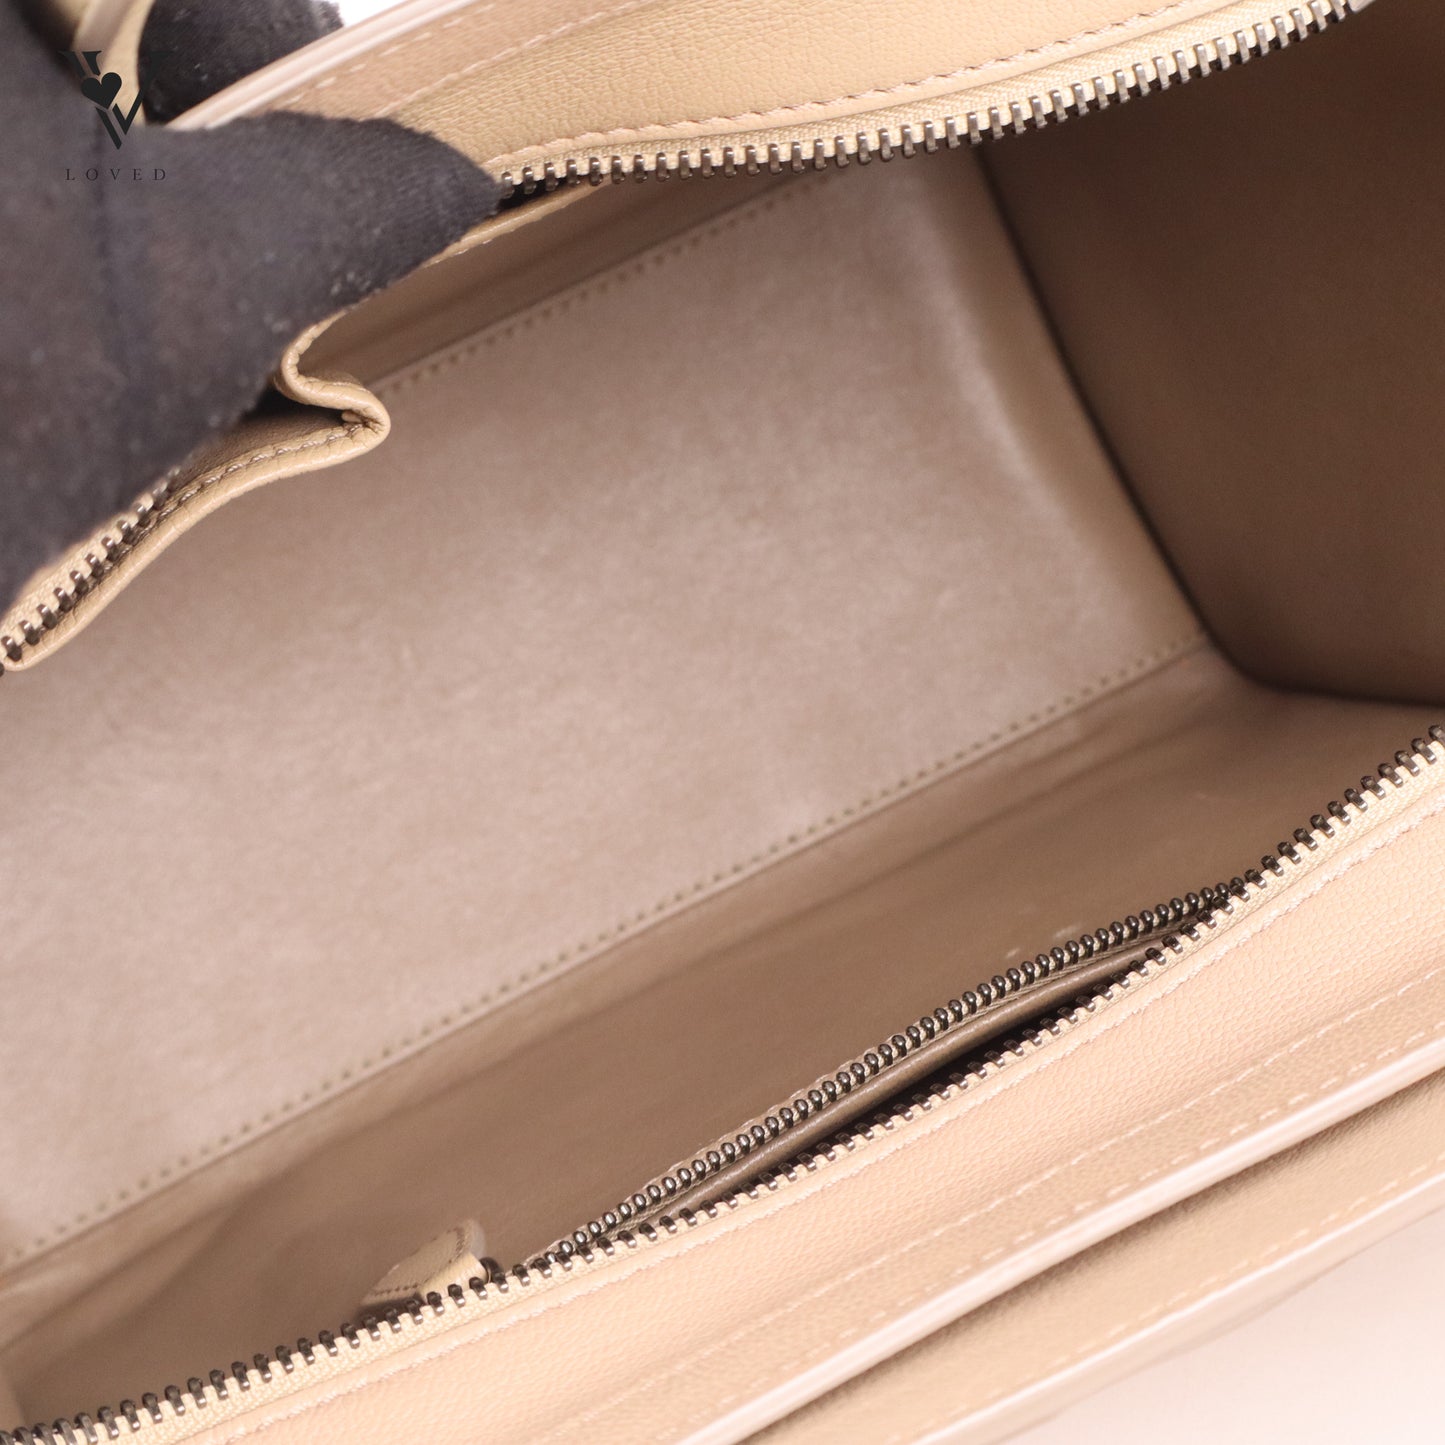 Micro Luggage in Soft Grained Calfskin Leather